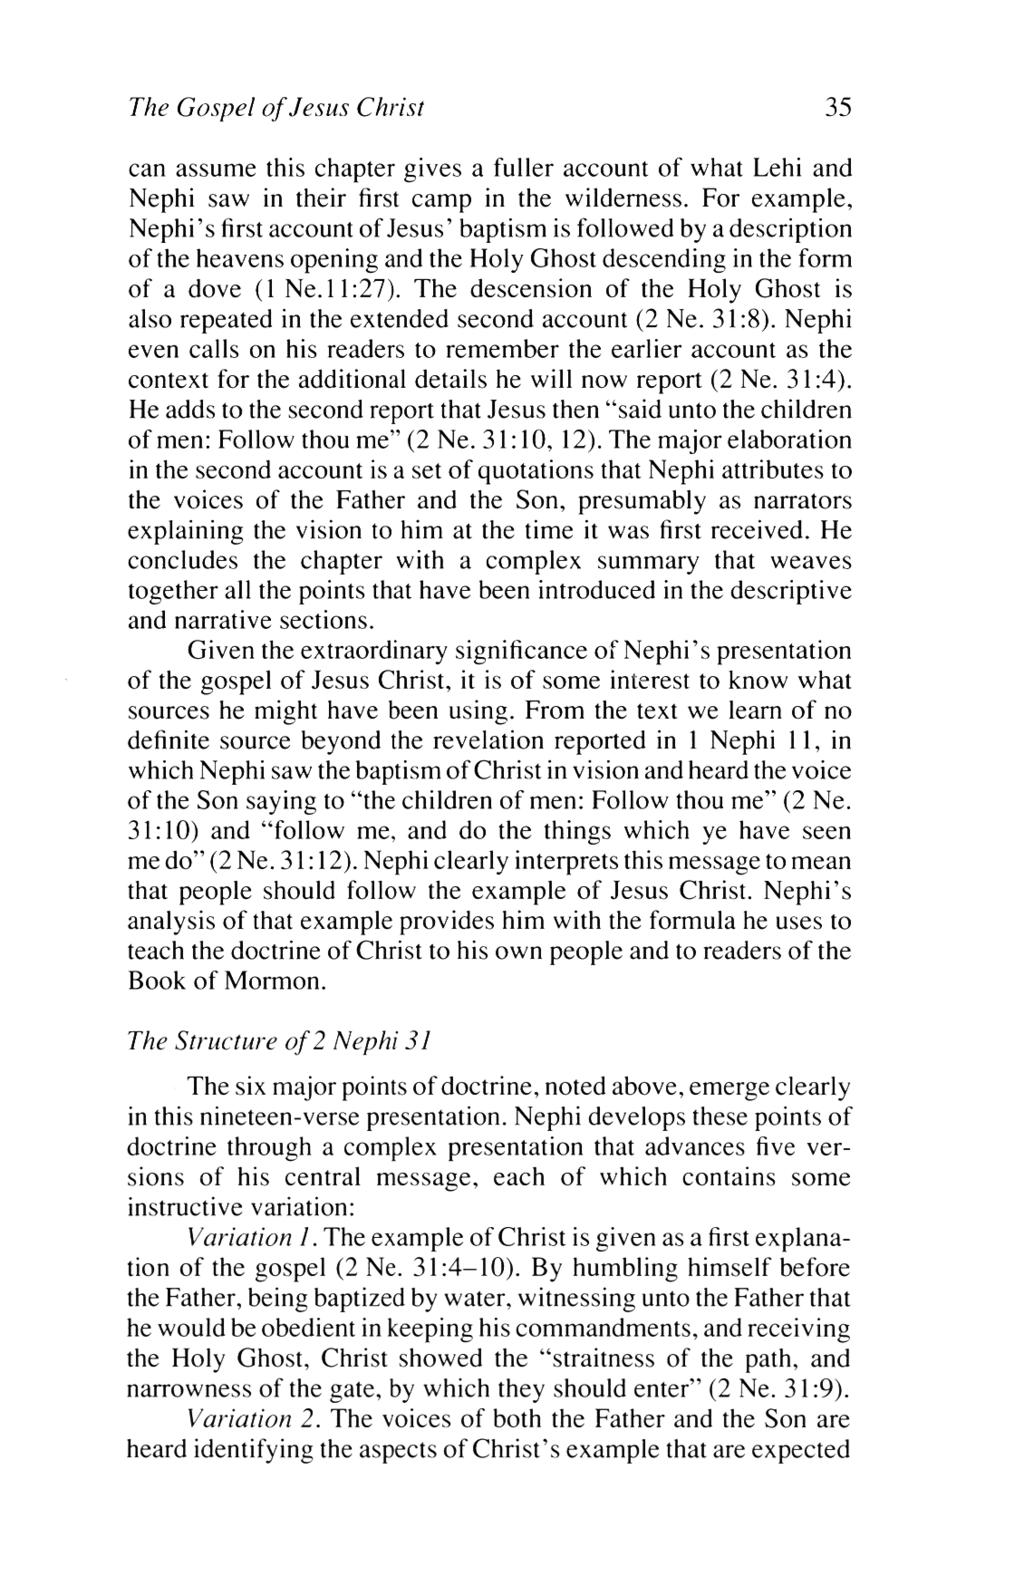 Reynolds: The Gospel of Jesus Christ as Taught by the Nephite Prophets the gospel of jesus christ 35 can assume this chapter gives a fuller account of what lehi and nephi saw in their first camp in